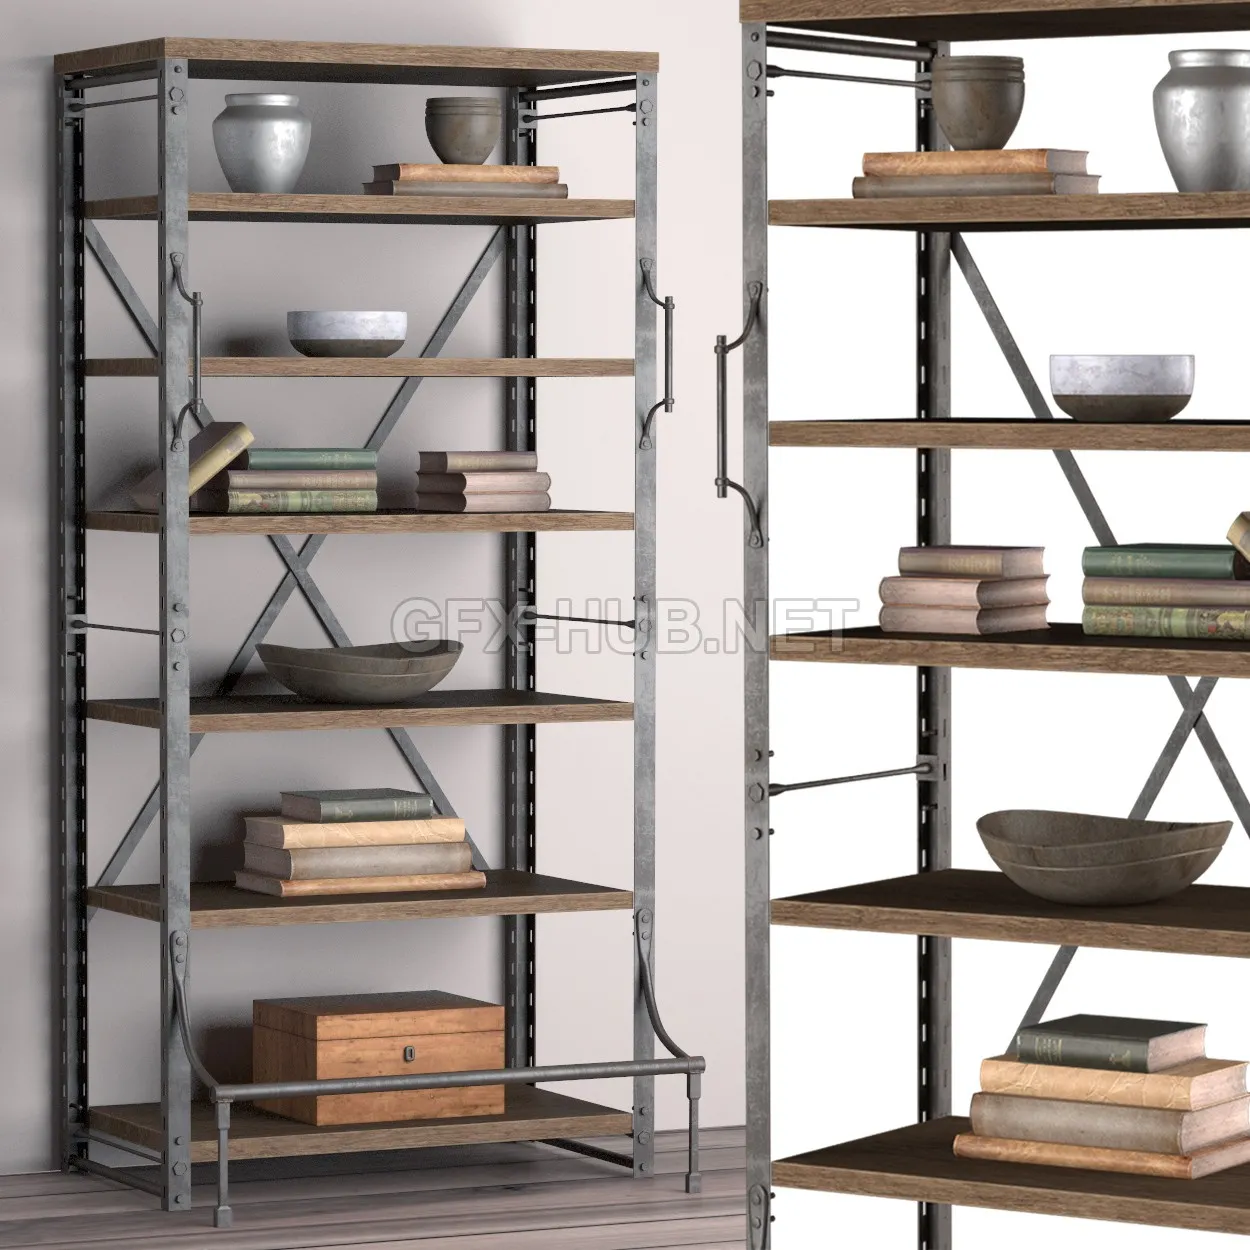 FURNITURE 3D MODELS – FRENCH LIBRARY RACK